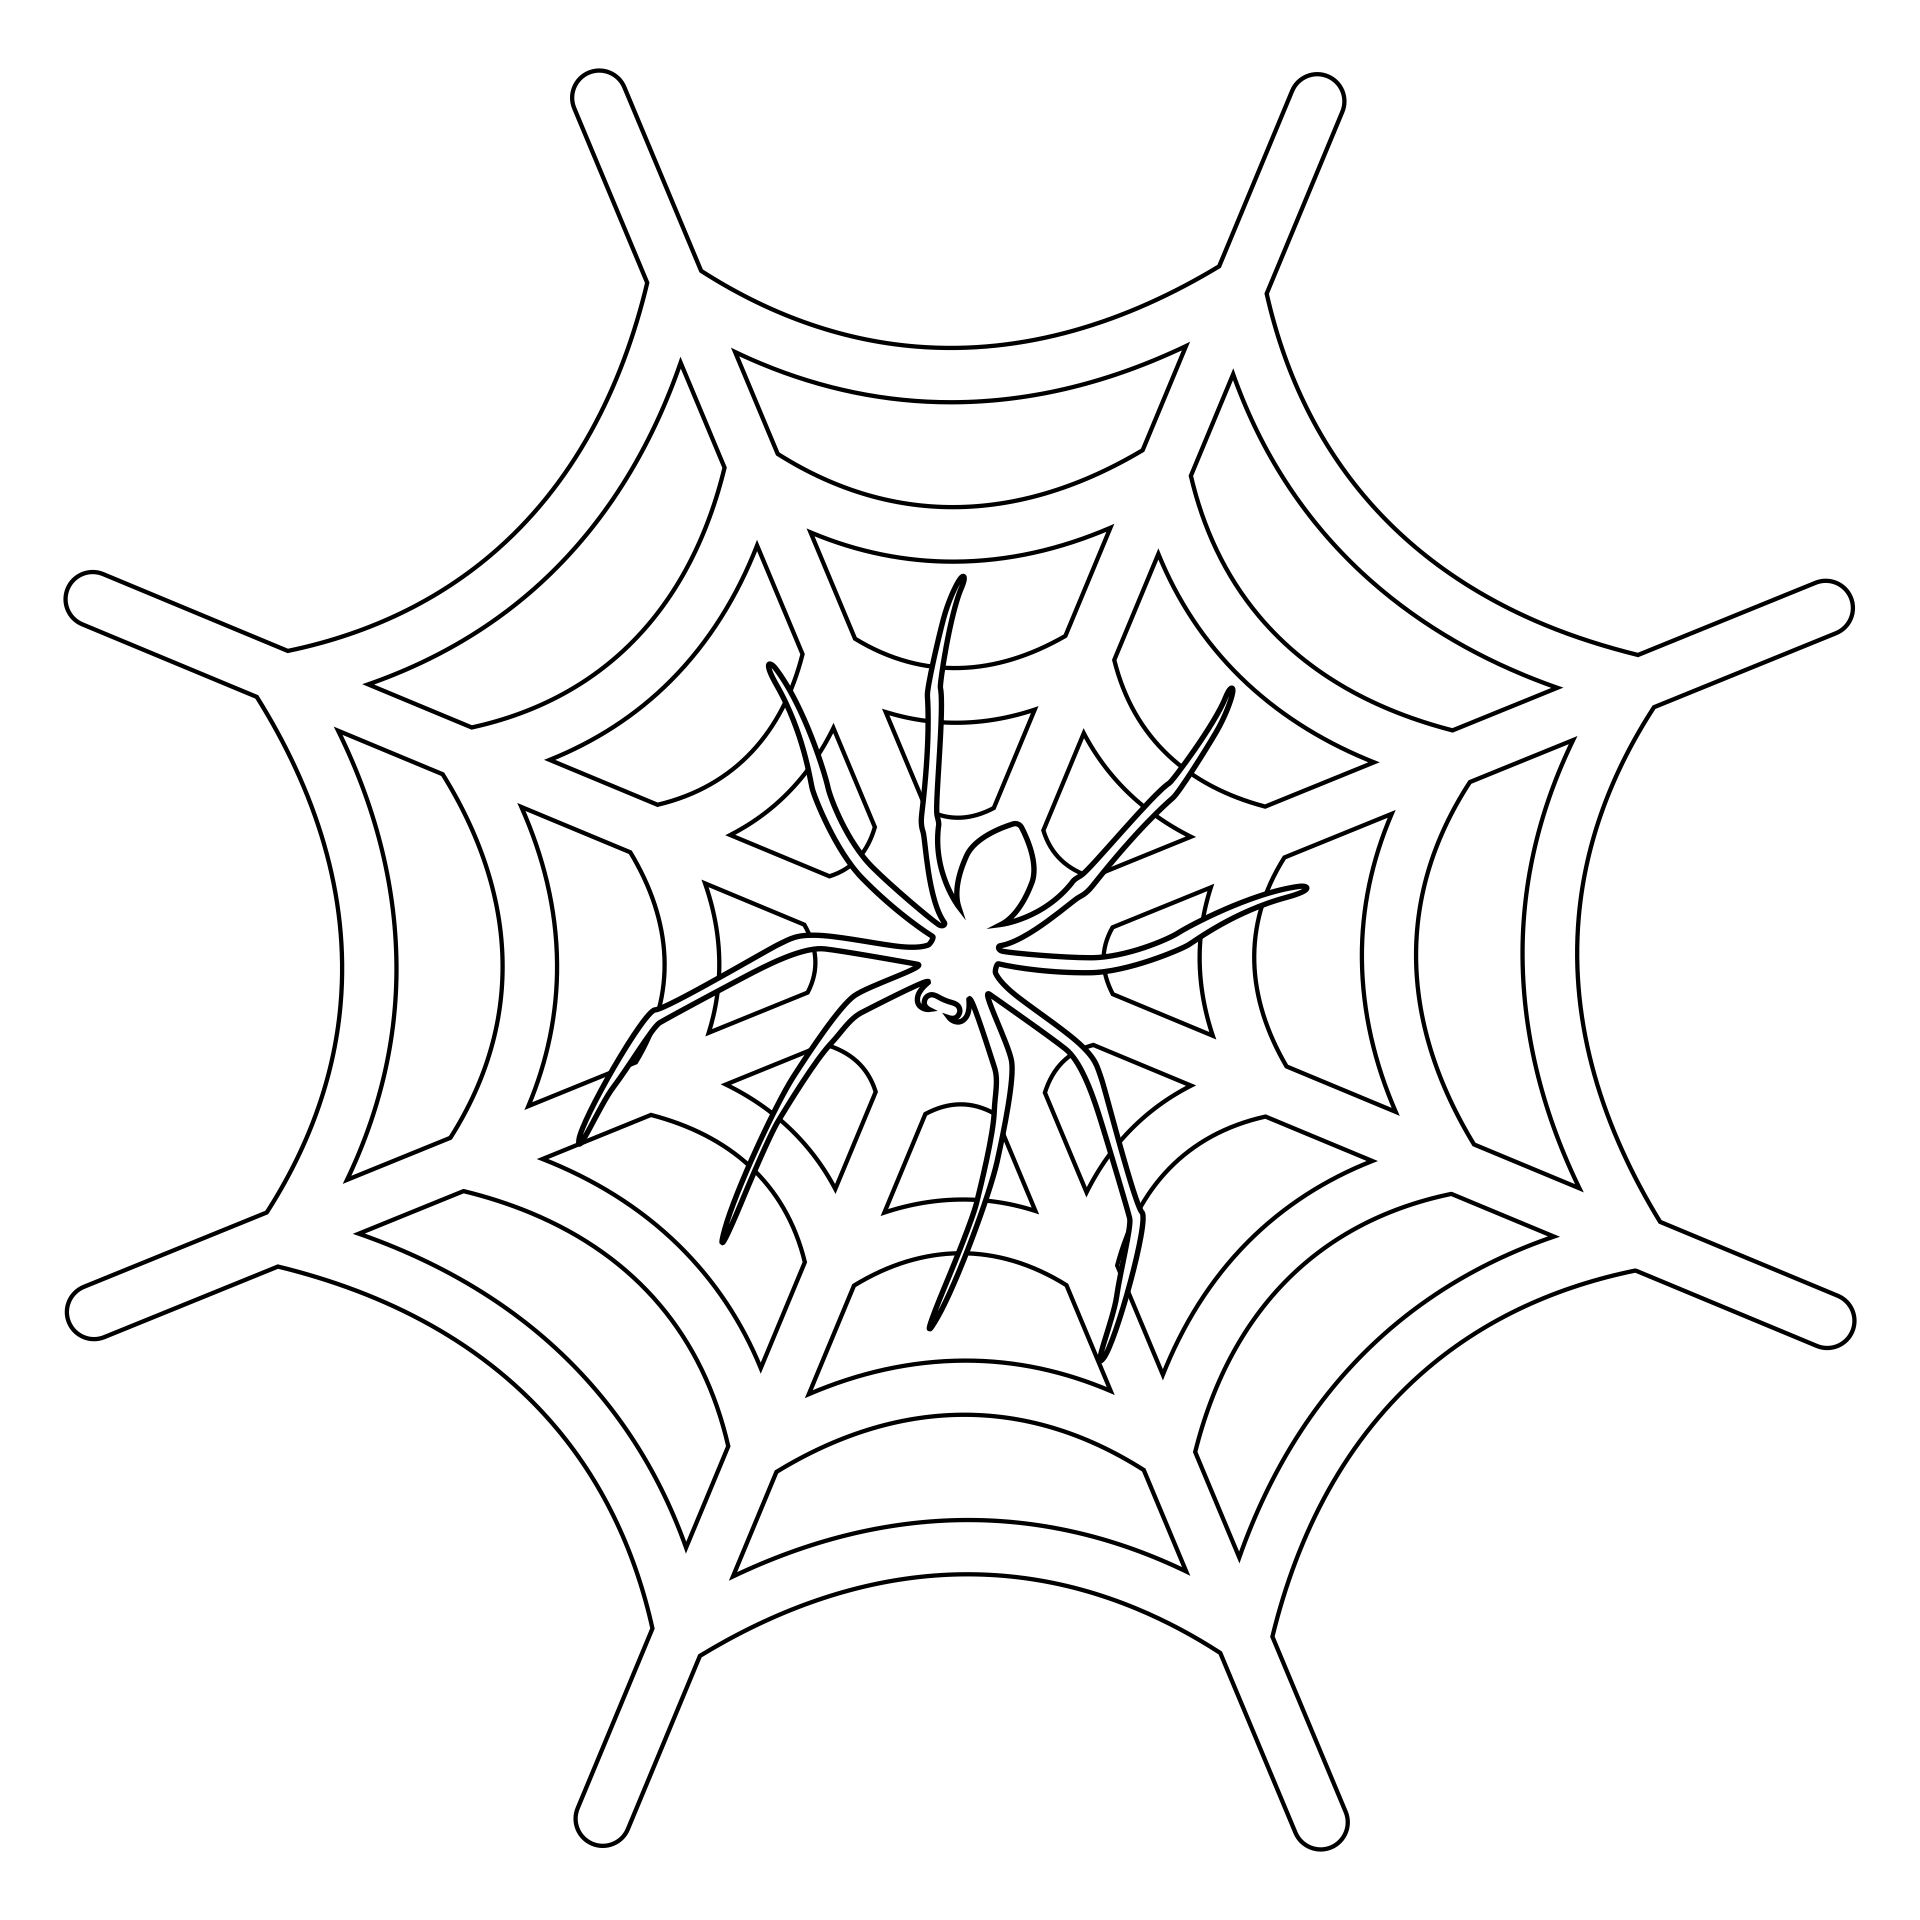 Free Printable Spider Web Coloring Pages